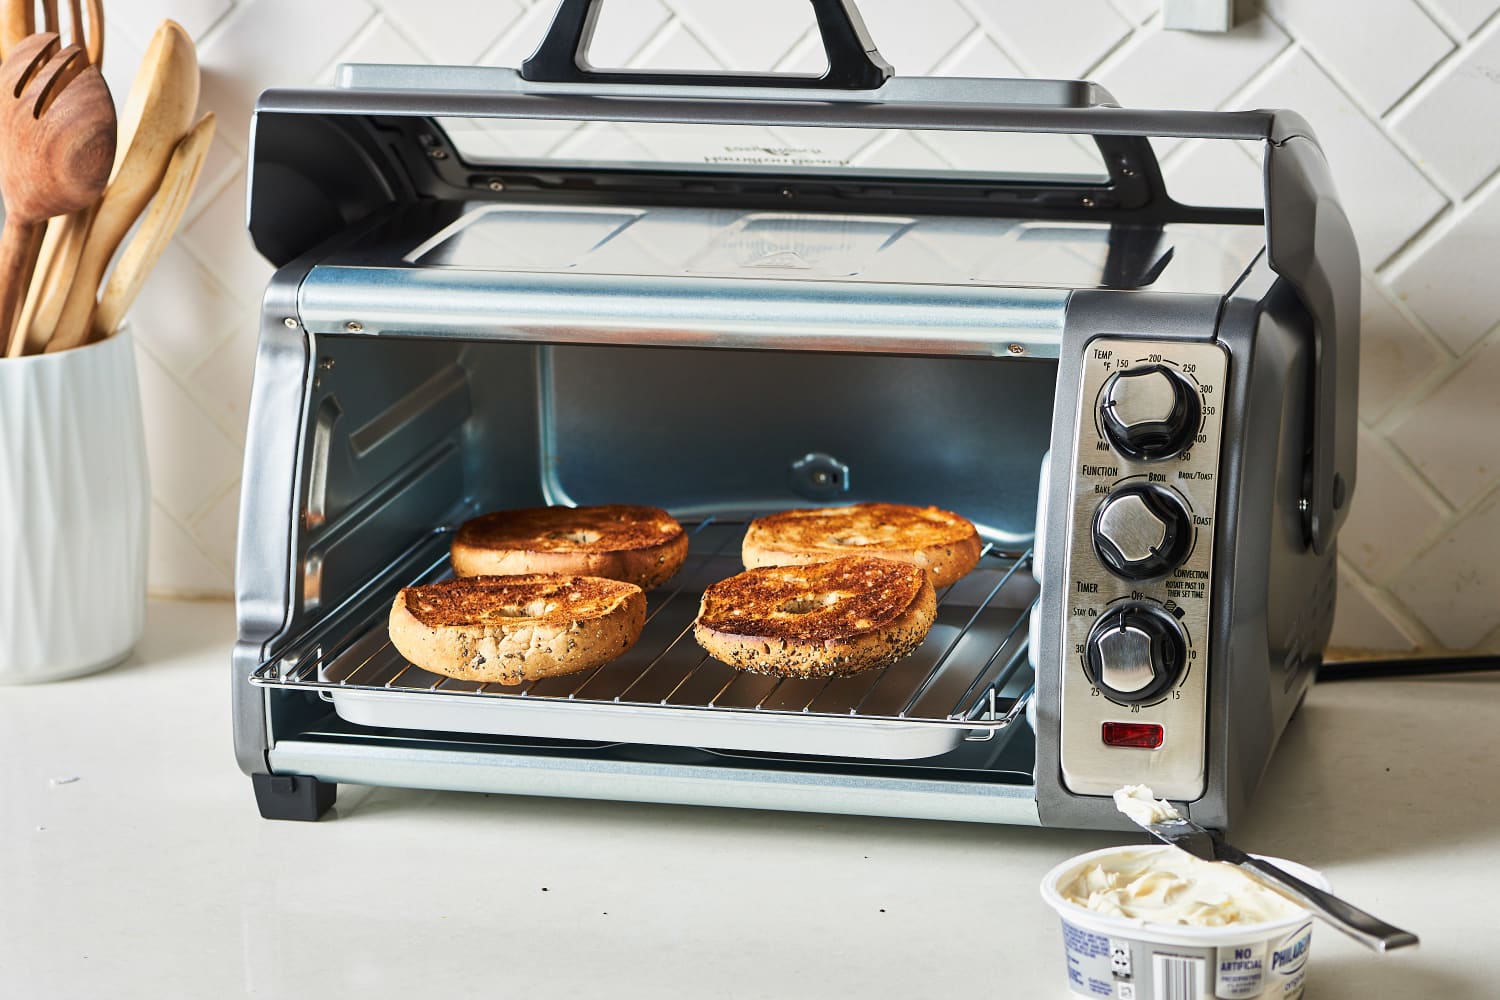 The Best Toasters Ovens To Buy in 2021, According to Expert Tests